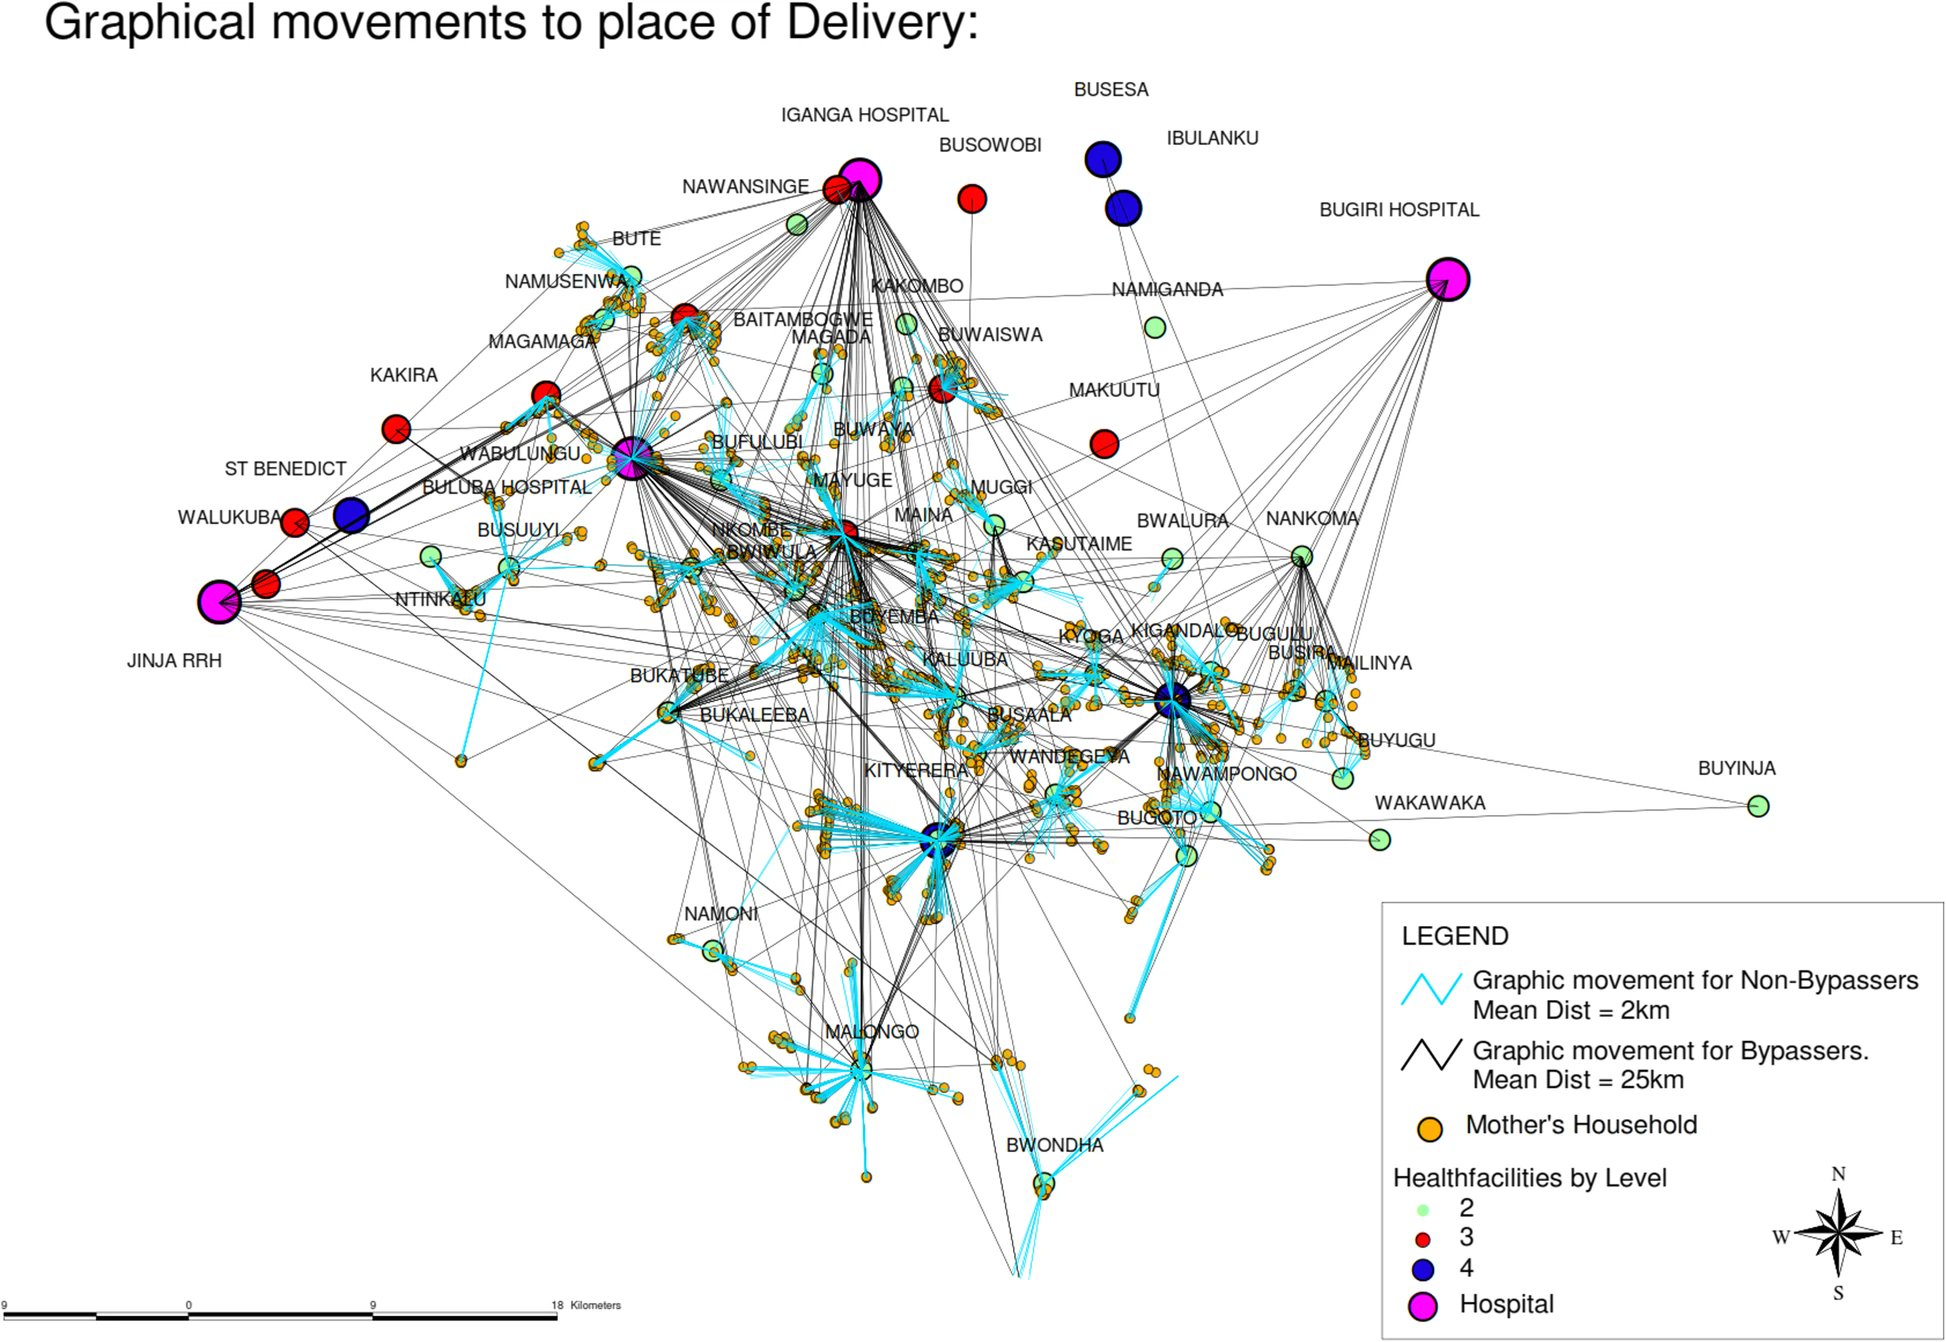 Graphical movements to places of delivery.